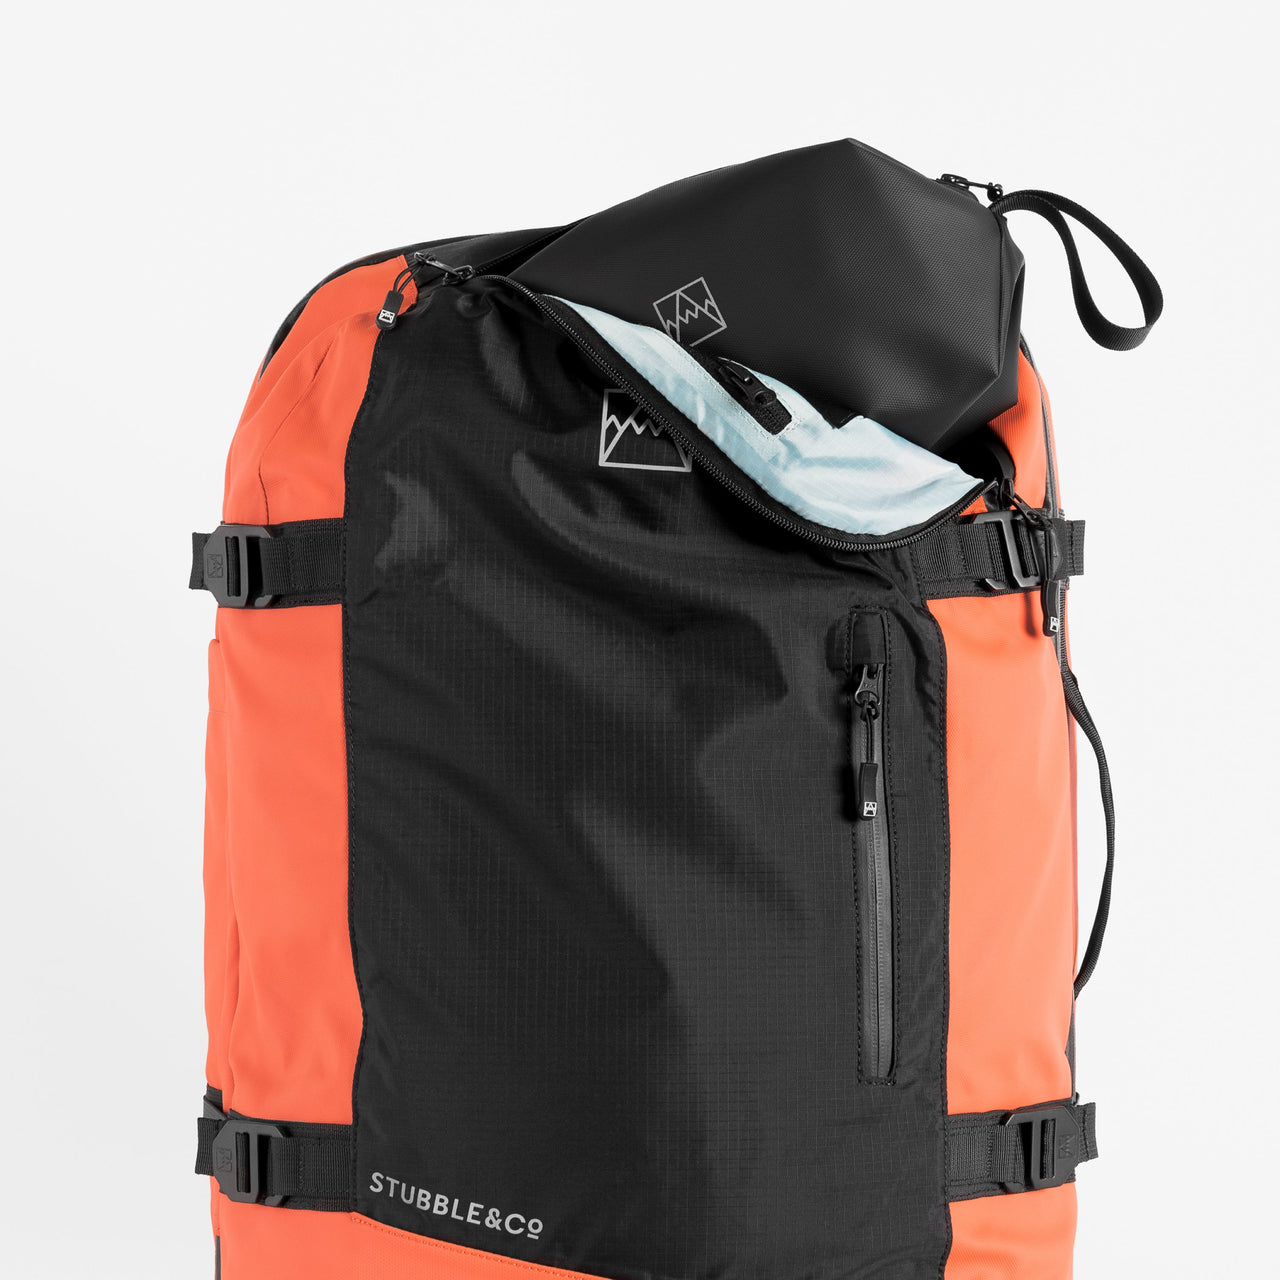 Adventure Bag in Ember Orange front view with top pocket open